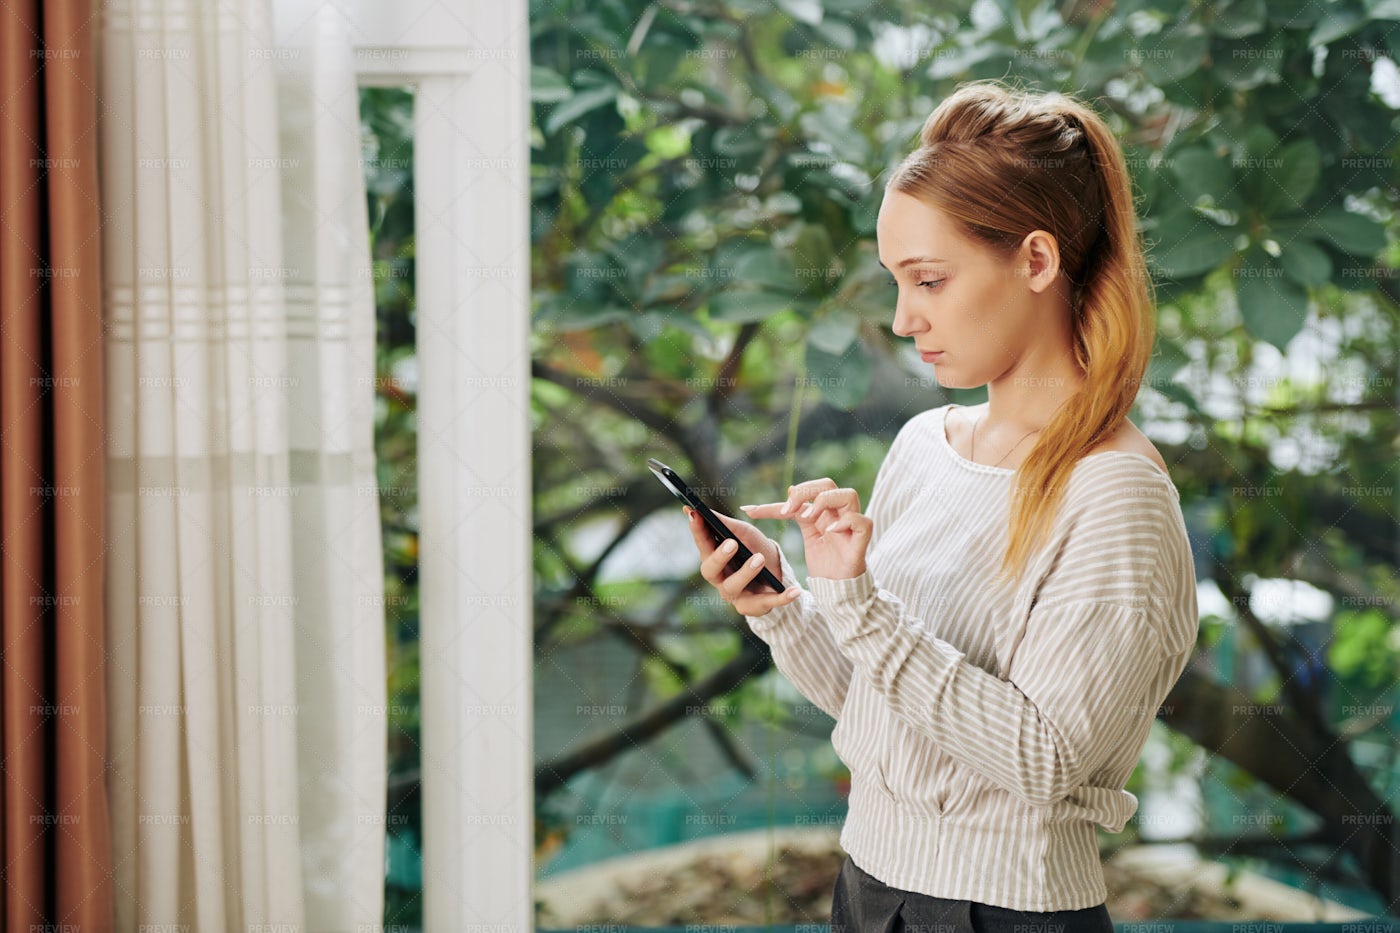 Woman Texting Messages: Stock Photos